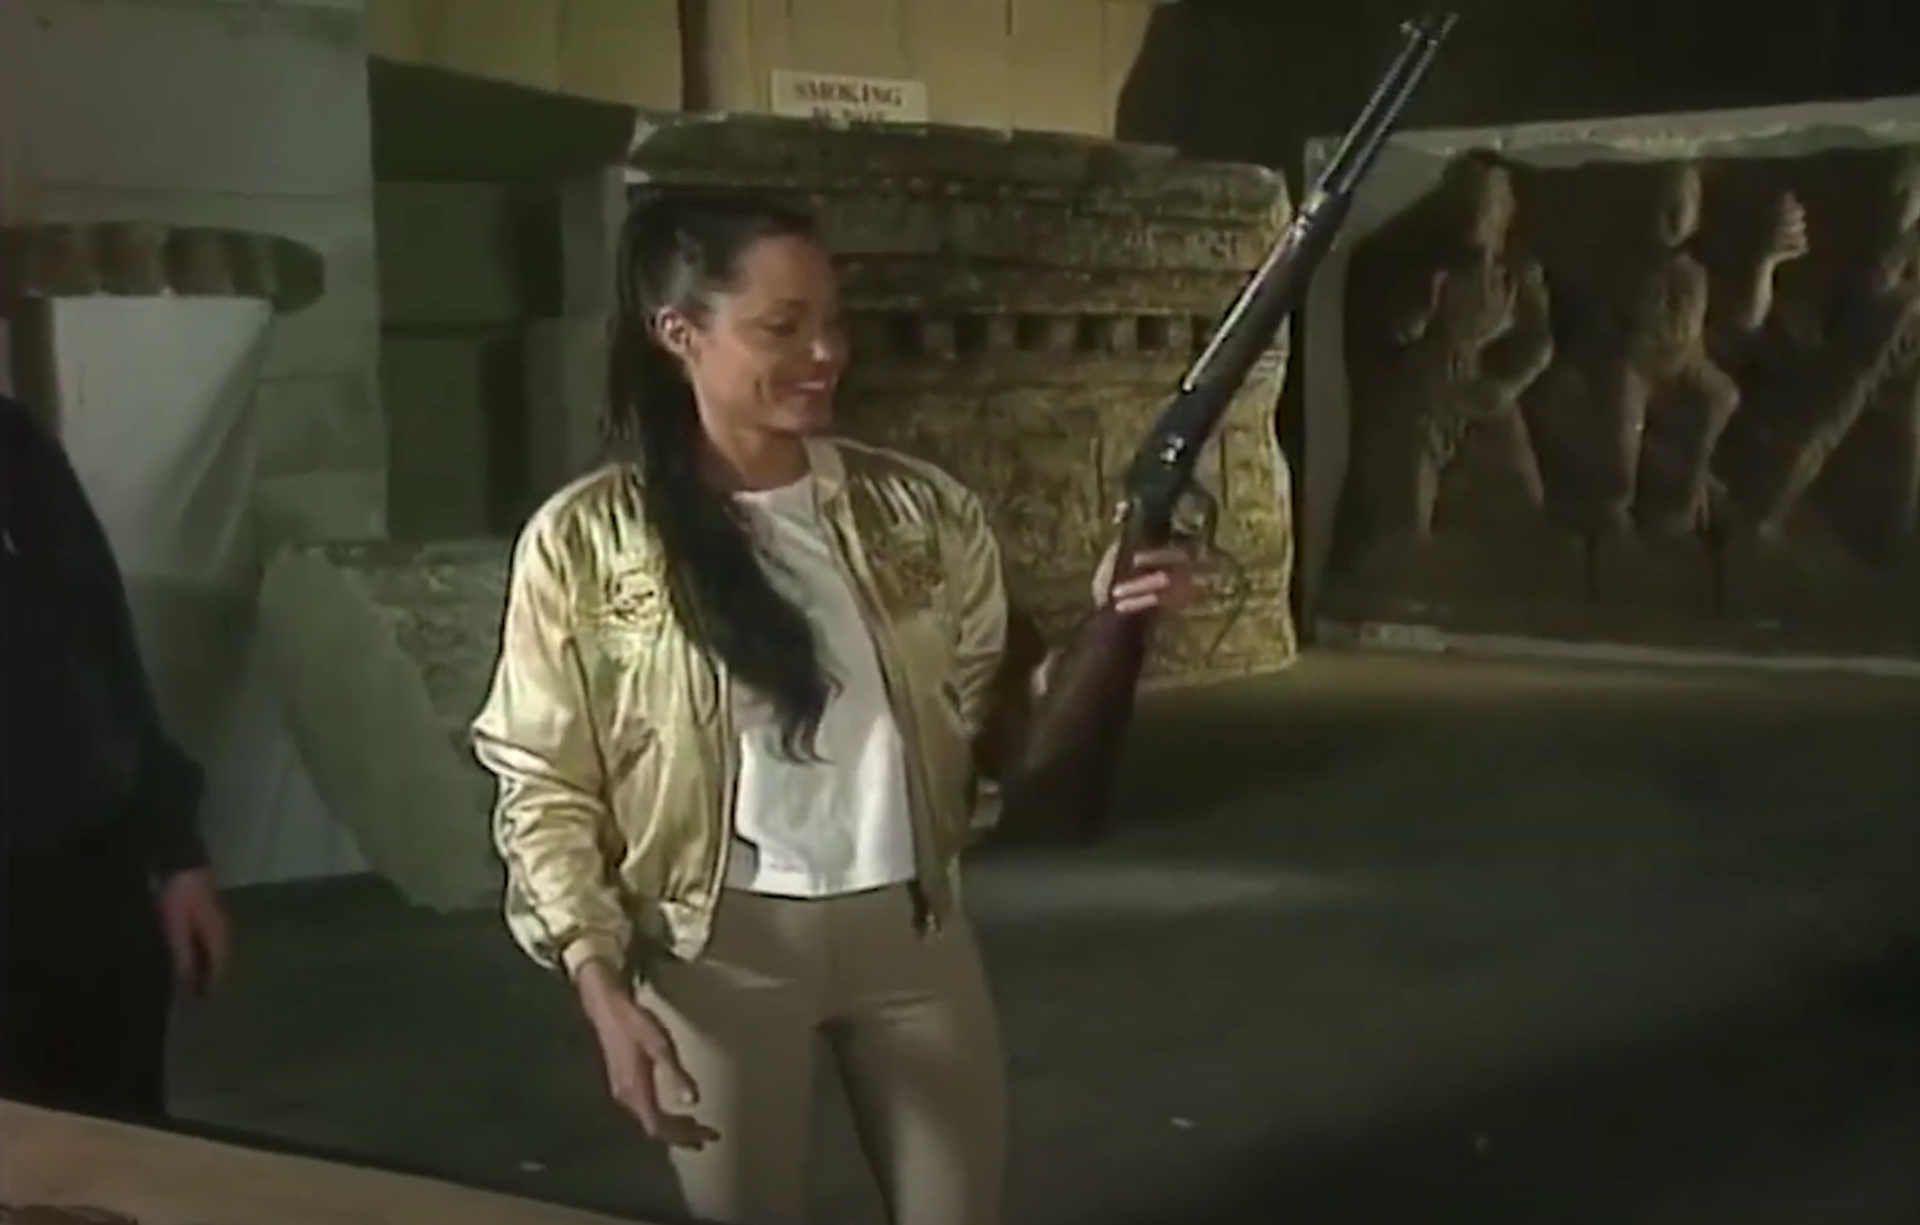 Actress Angelina Jolie holds a rifle during filming for a featurette on Lara Croft: Tomb Raider – The Cradle of Life. The 2003 film came as the sequel to Lara Croft: Tomb Raider (2001) and was directed by Jan de Bont.  - Sputnik International, 1920, 05.11.2021